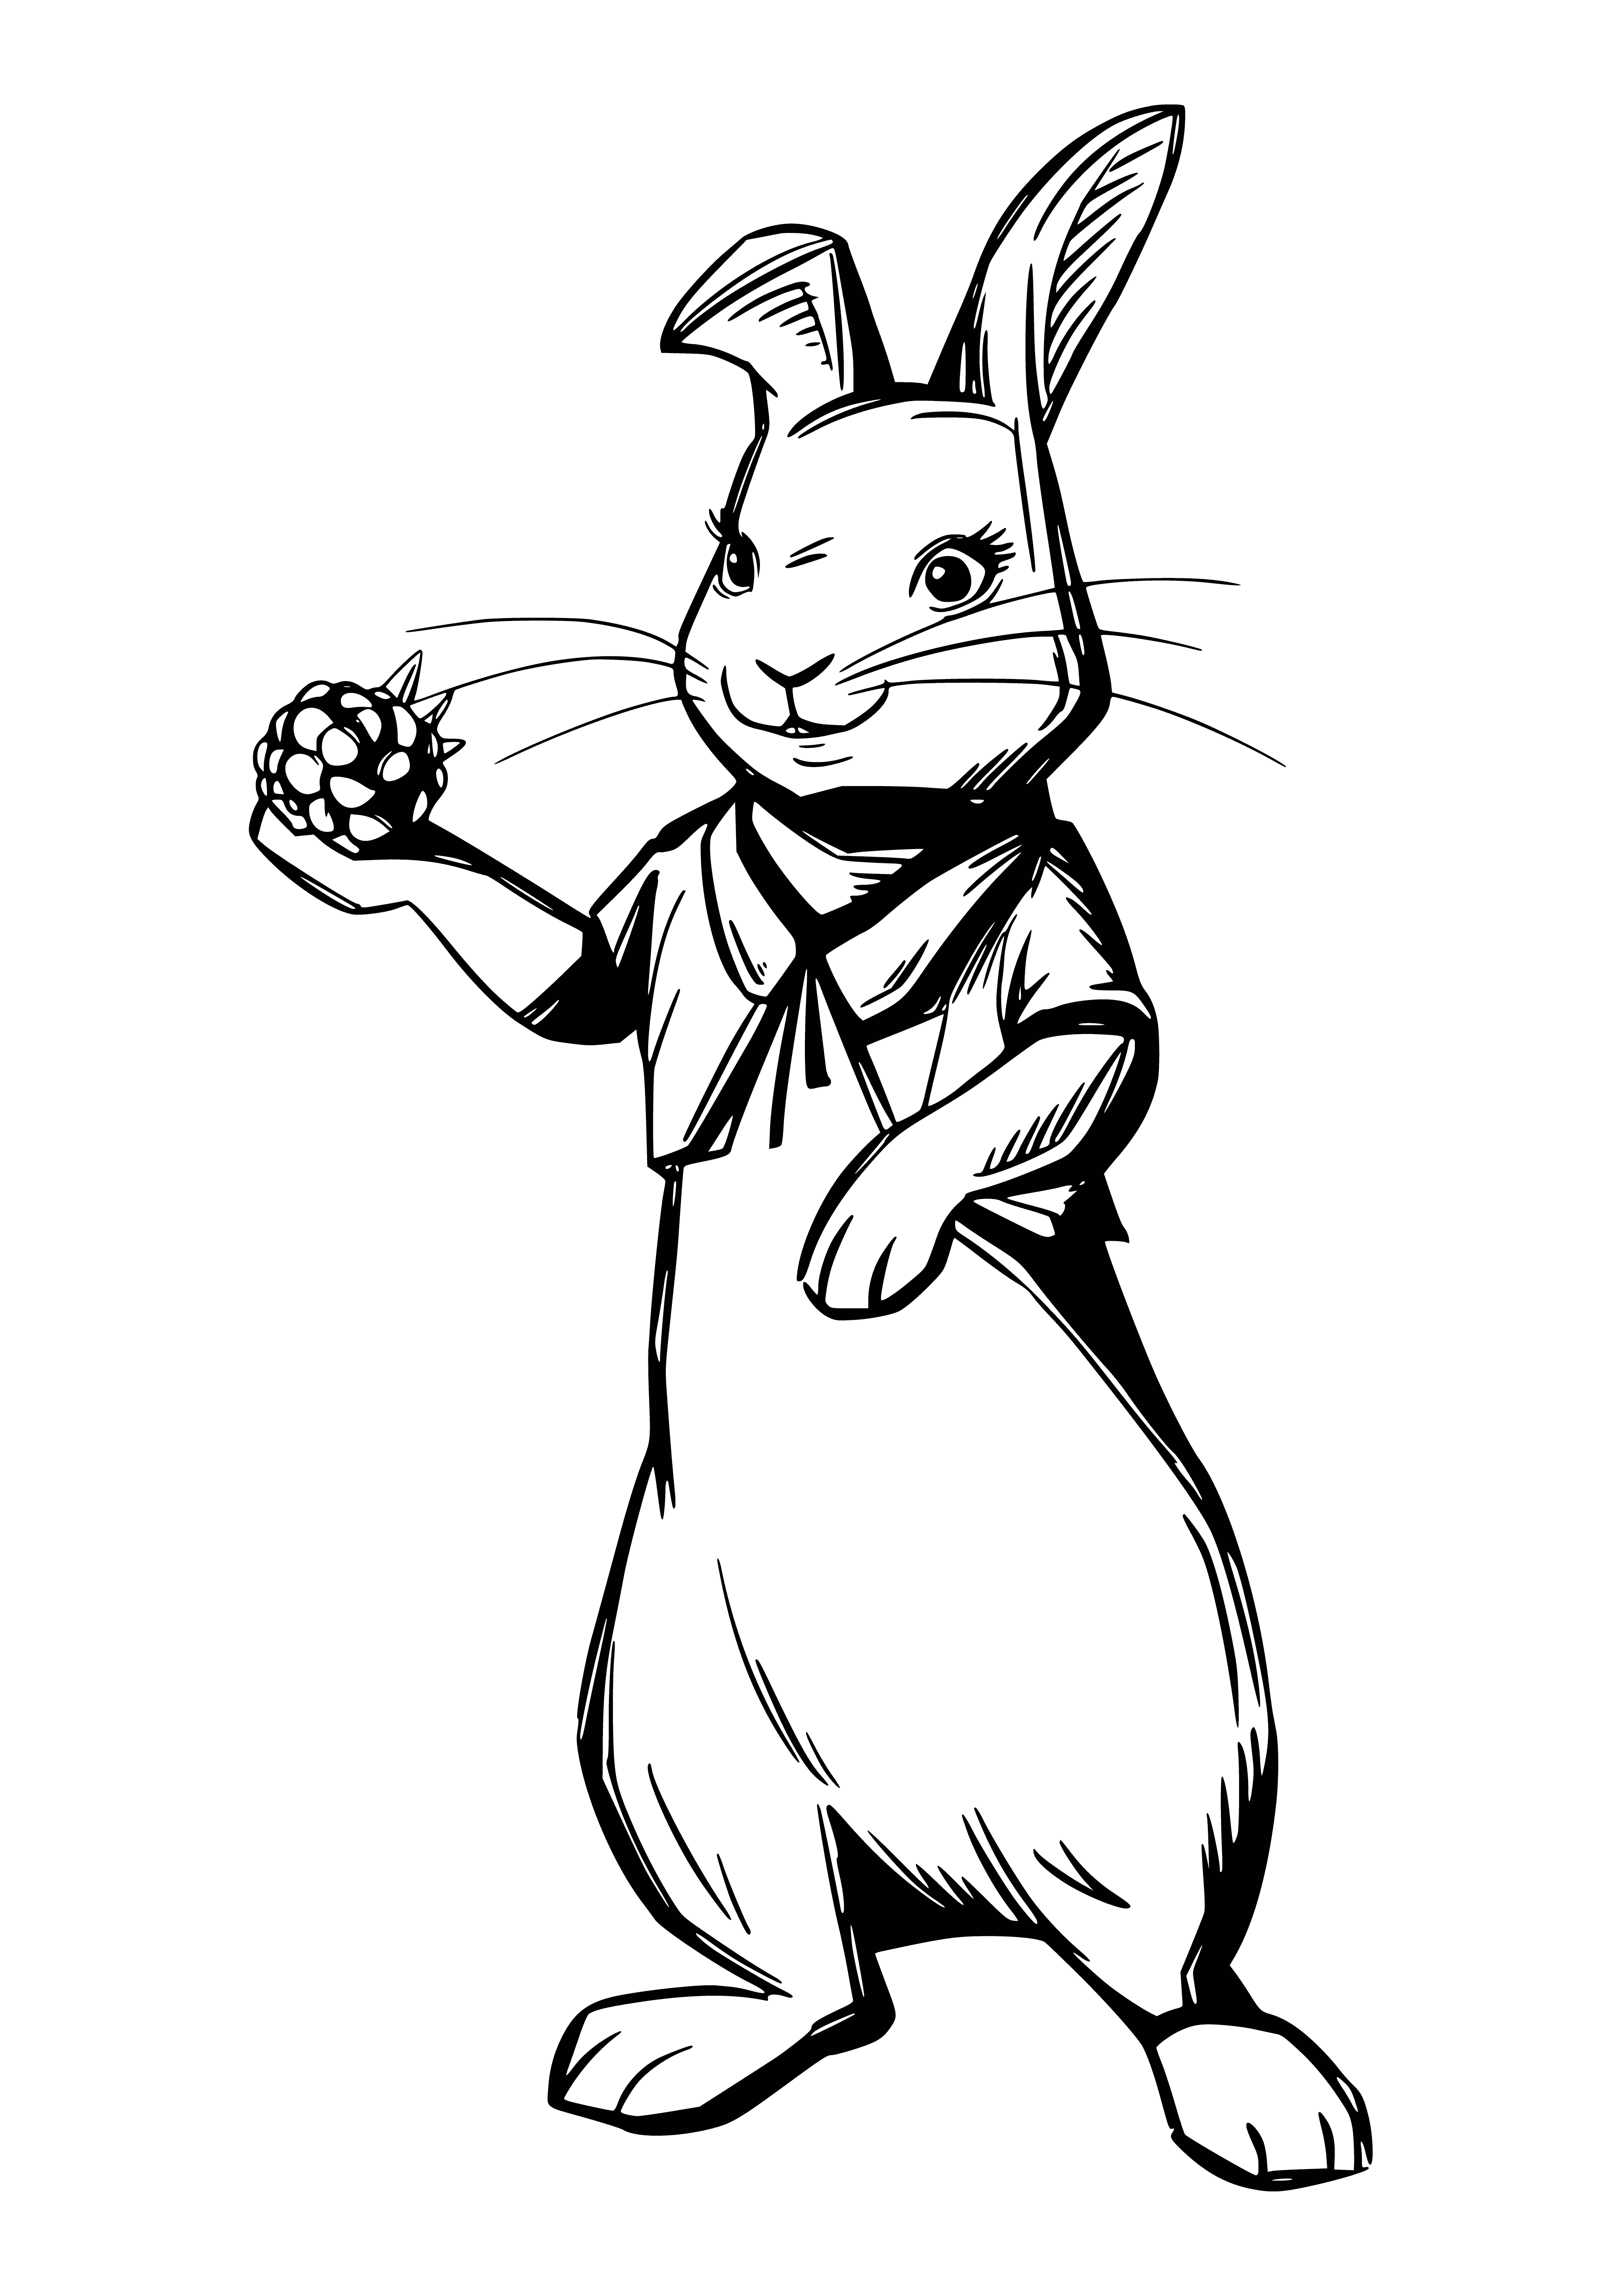 Rabbit Floppy coloring page